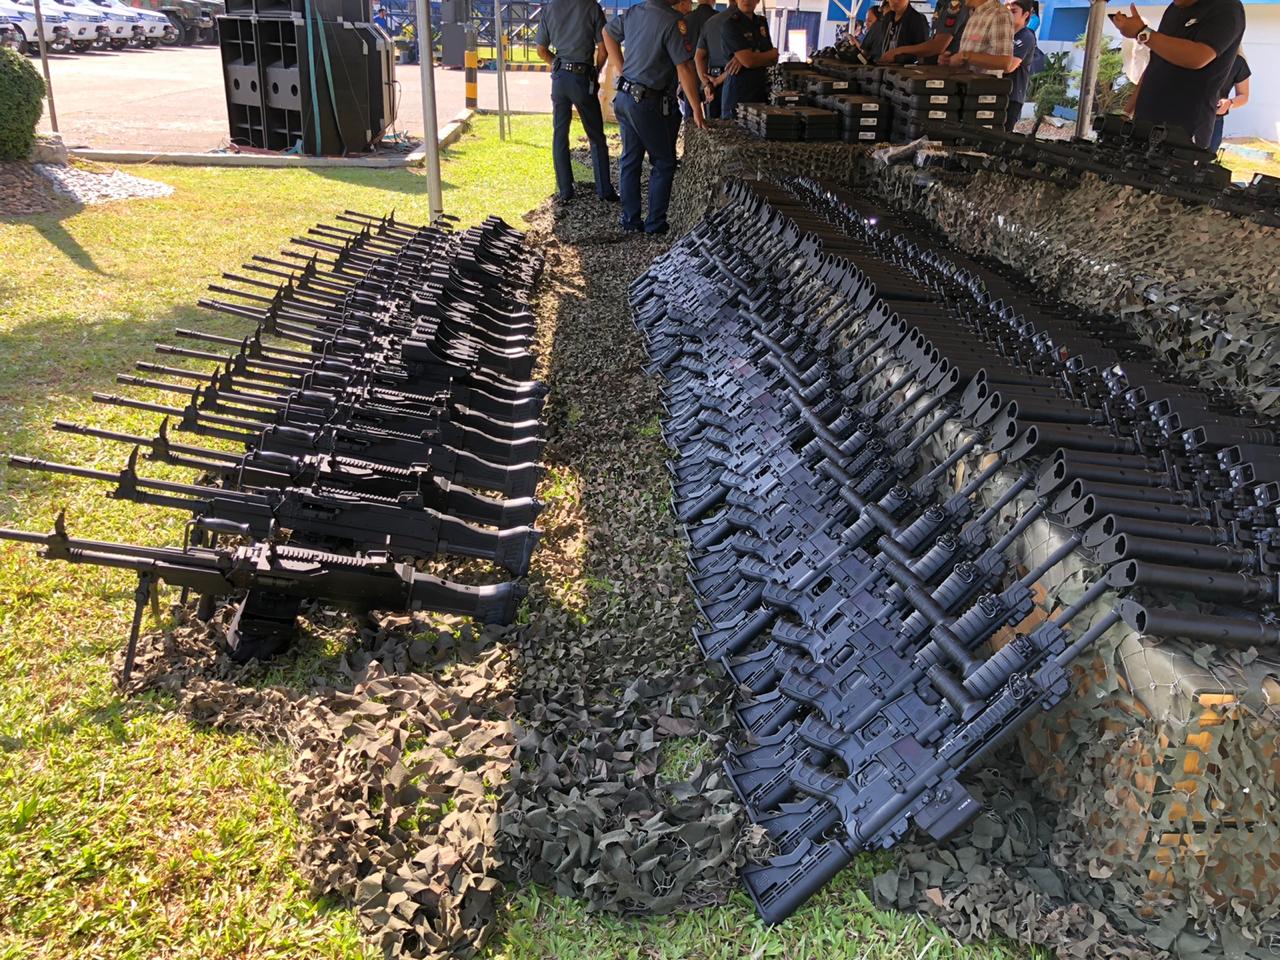 Police-equipment-including-choppers-troop-carriers-bomb-equipment-and-firearms-were-presented-and-blessed-at-Camp-Crame-12.jpeg